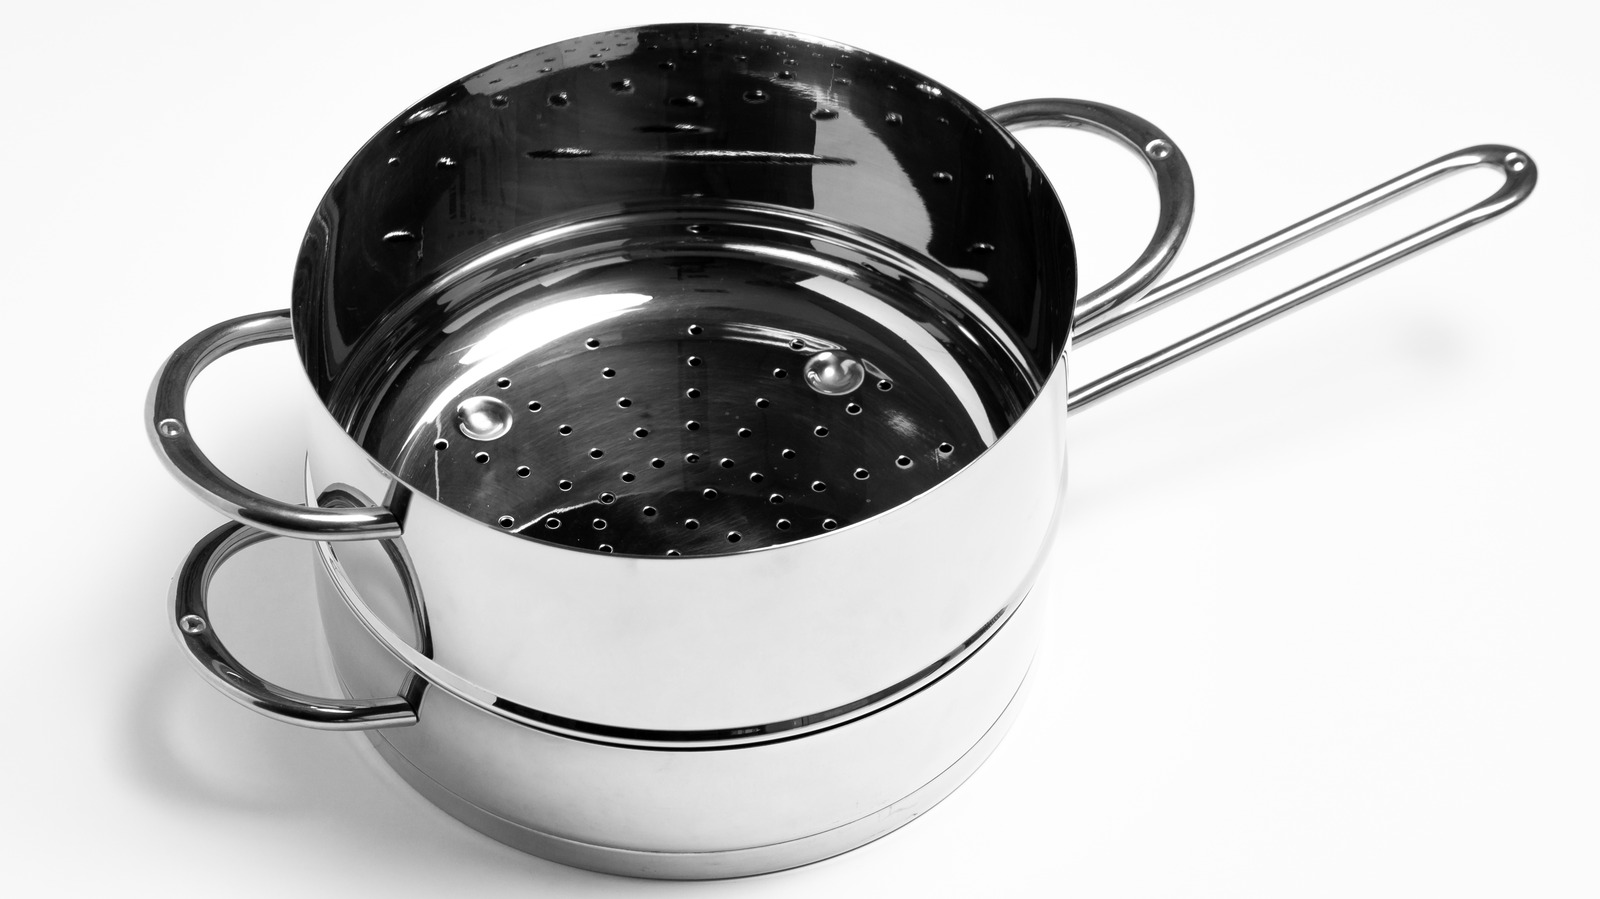 https://www.thedailymeal.com/img/gallery/what-is-a-double-boiler-and-when-should-you-use-one/l-intro-1672853621.jpg